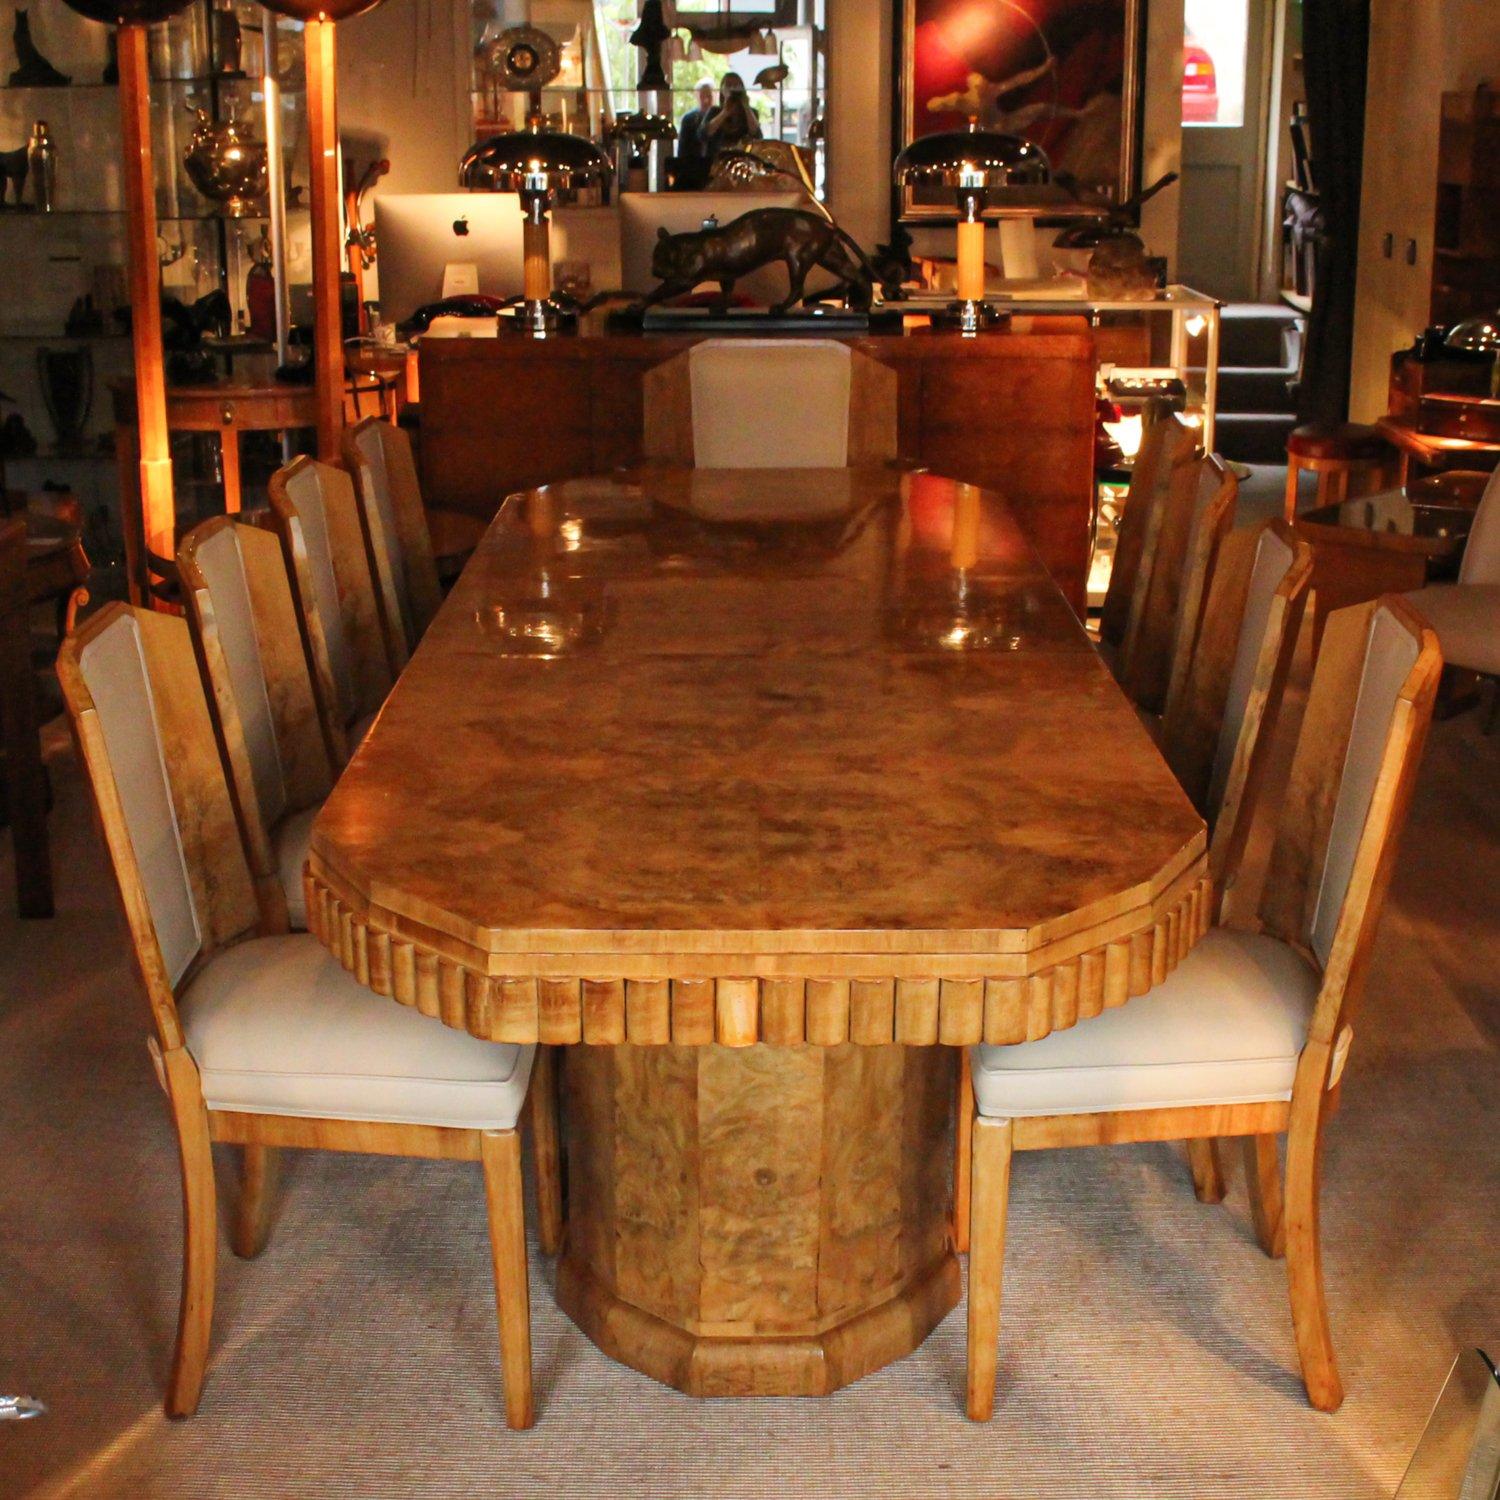 Art Deco, walnut veneered dining table with ten chairs (eight chairs and two armchairs) by Hille. Refurbished, re-polished and re-upholstered in cream leather.

Dimensions: H 78 cm L 265 cm, W 95 cm
Armchair seat W 66 cm, seat D 50 cm, seat H 46